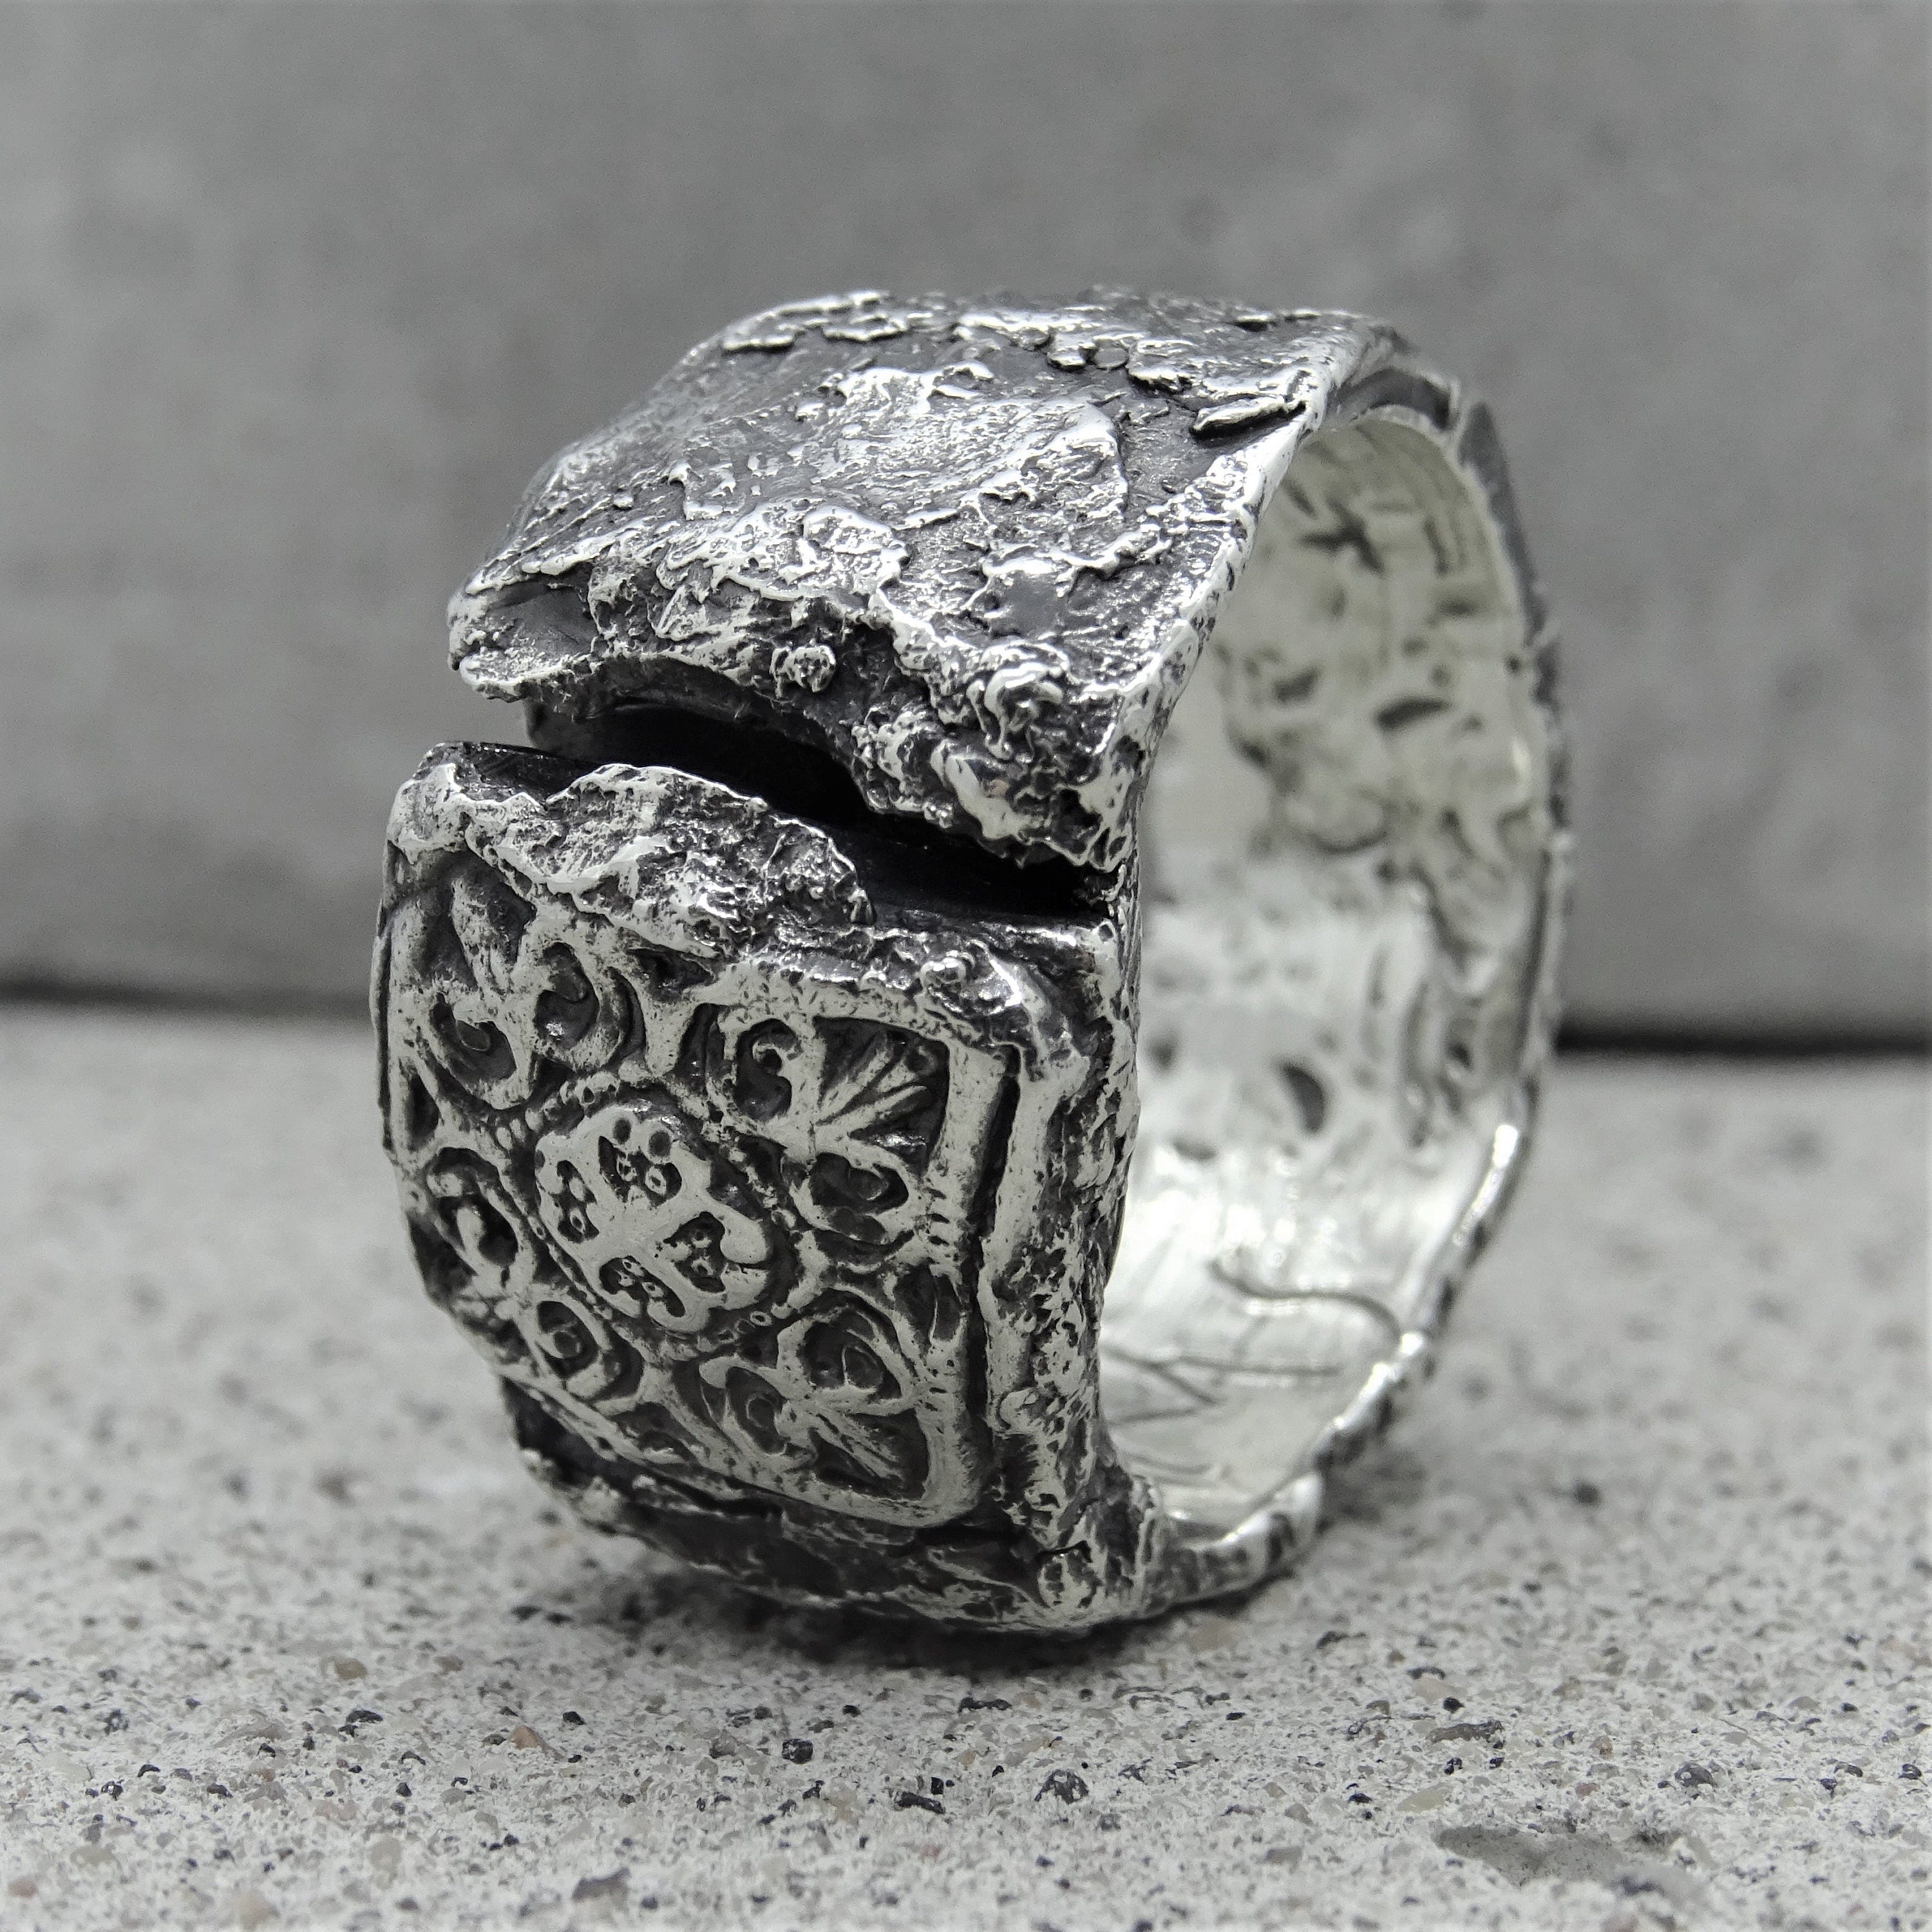 eastern ring unusual textures ring with cracks and oriental pattern rings with cracks and patterns project50g 834053